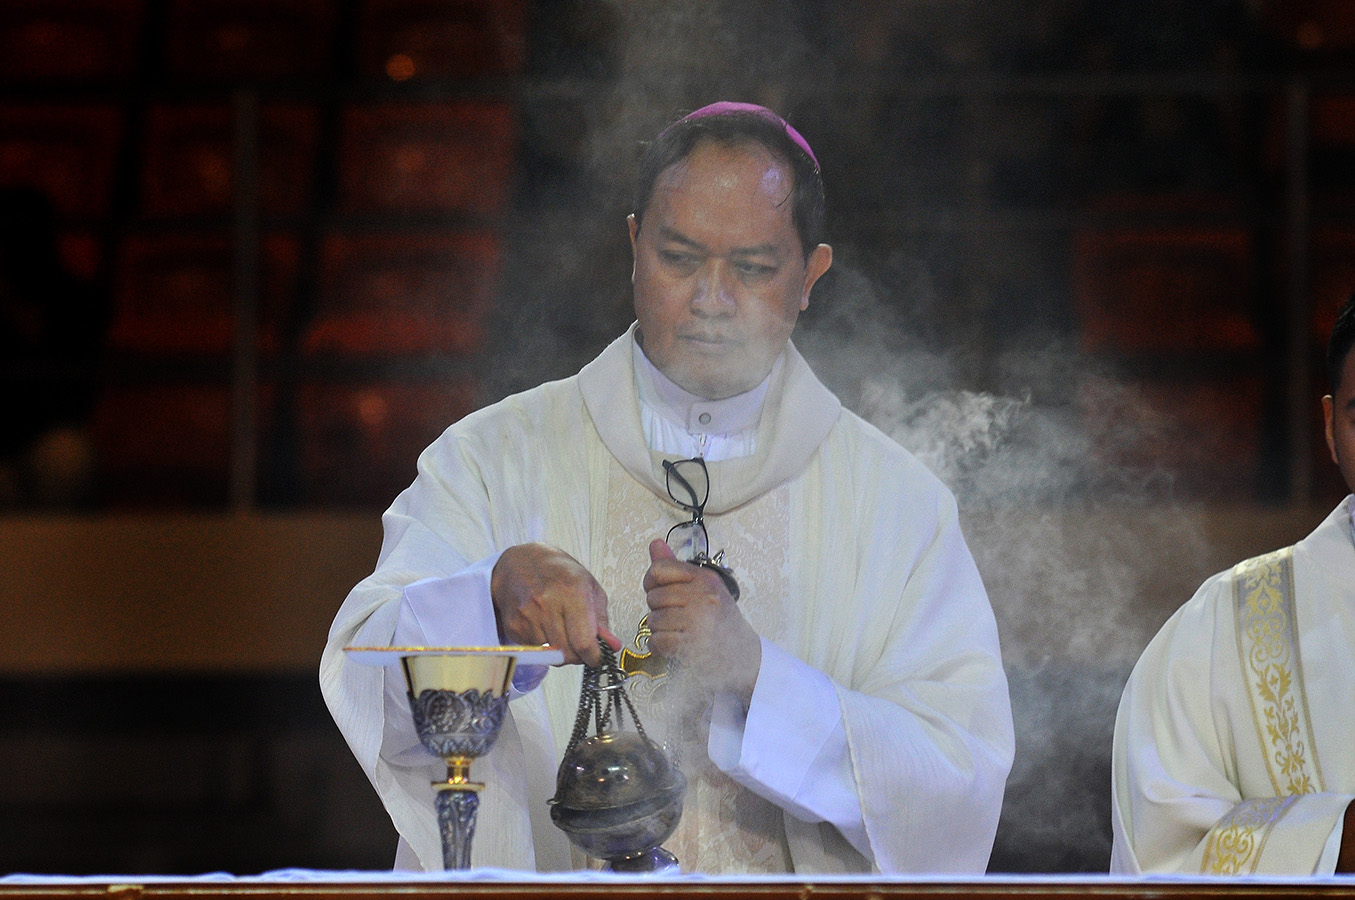 Bishop Pablo Virgilio David of Kalookan celebrates Mass at the Philippine Conference on New Evangelization at the University of Sto. Tomas in Manila, July 19, 2018. ROY LAGARDE